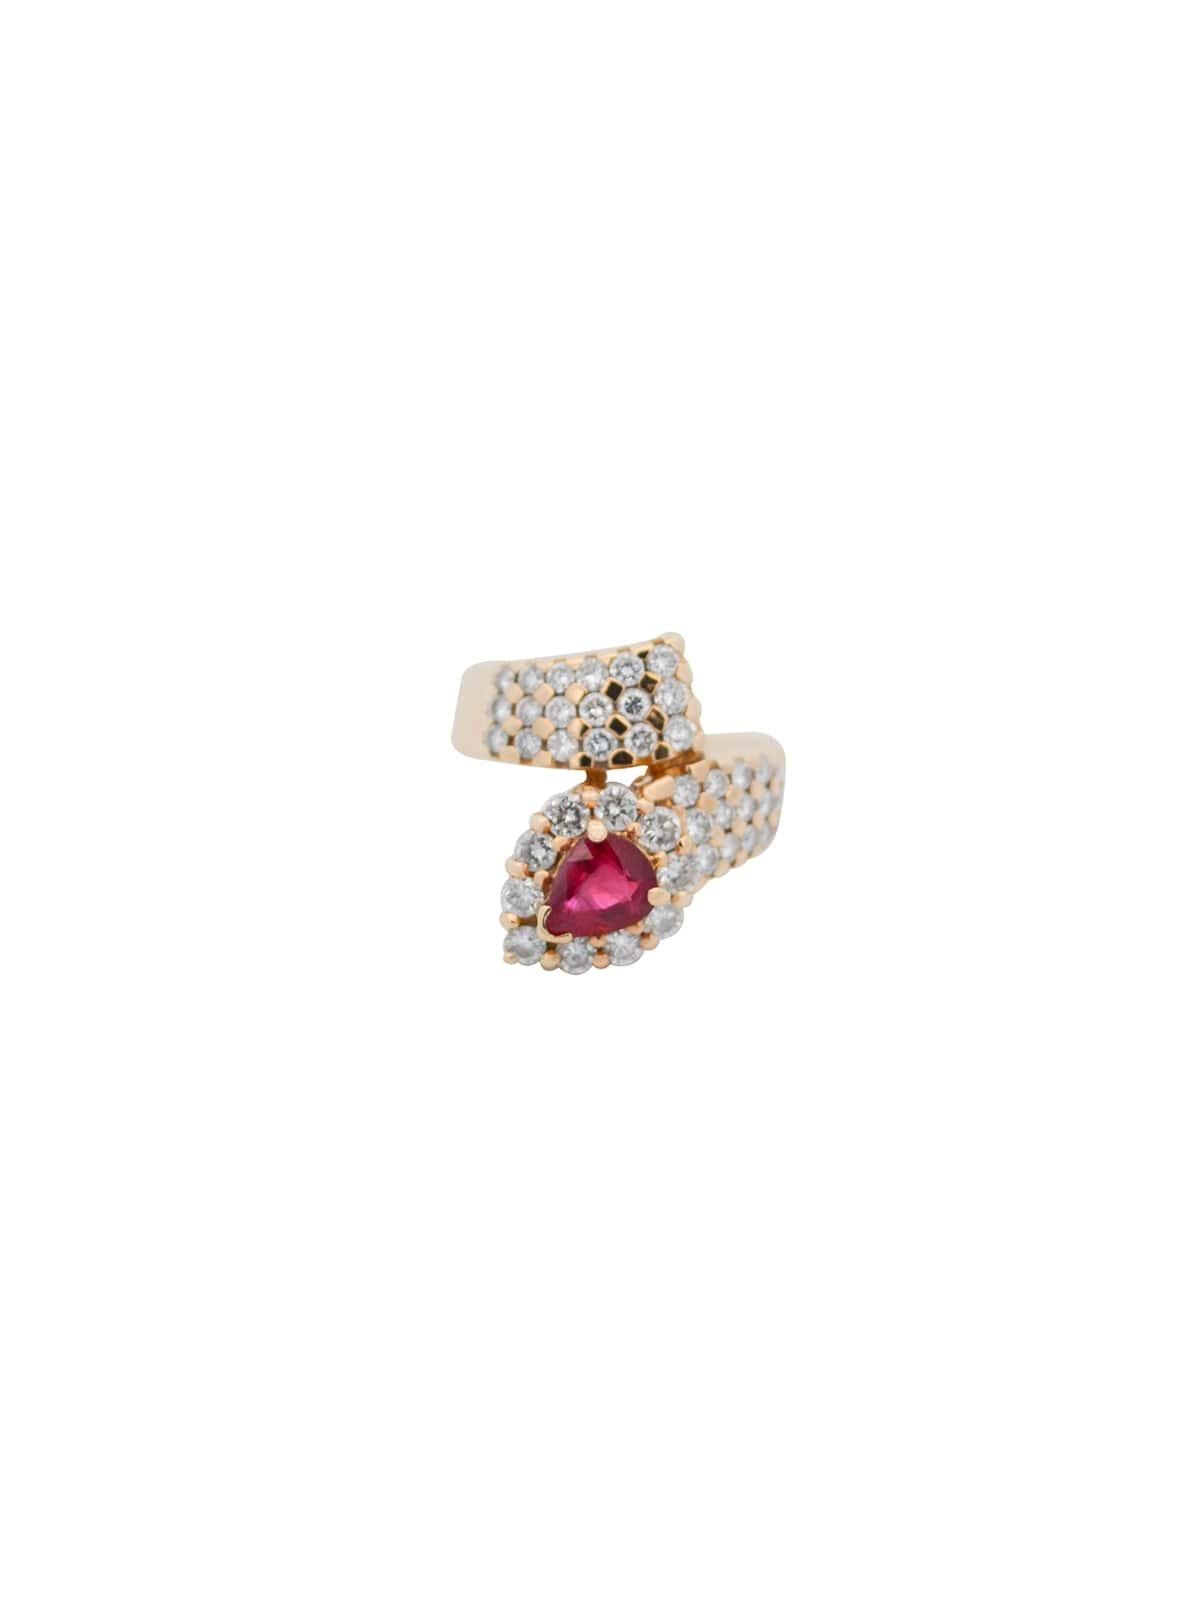 This beautiful statement ring frames 1.02ct in Burma (Myanmar) Ruby and 1.46ct t.w. diamonds. Set in 18K Yellow Gold.

 GIA Certificate: 2221758513
18K Gold: 8.48gr
Diamonds: 1.46ct
Clarity: VS1 - SI1
Color: G - H 
Burma (Myanmar) Ruby: 1.02ct